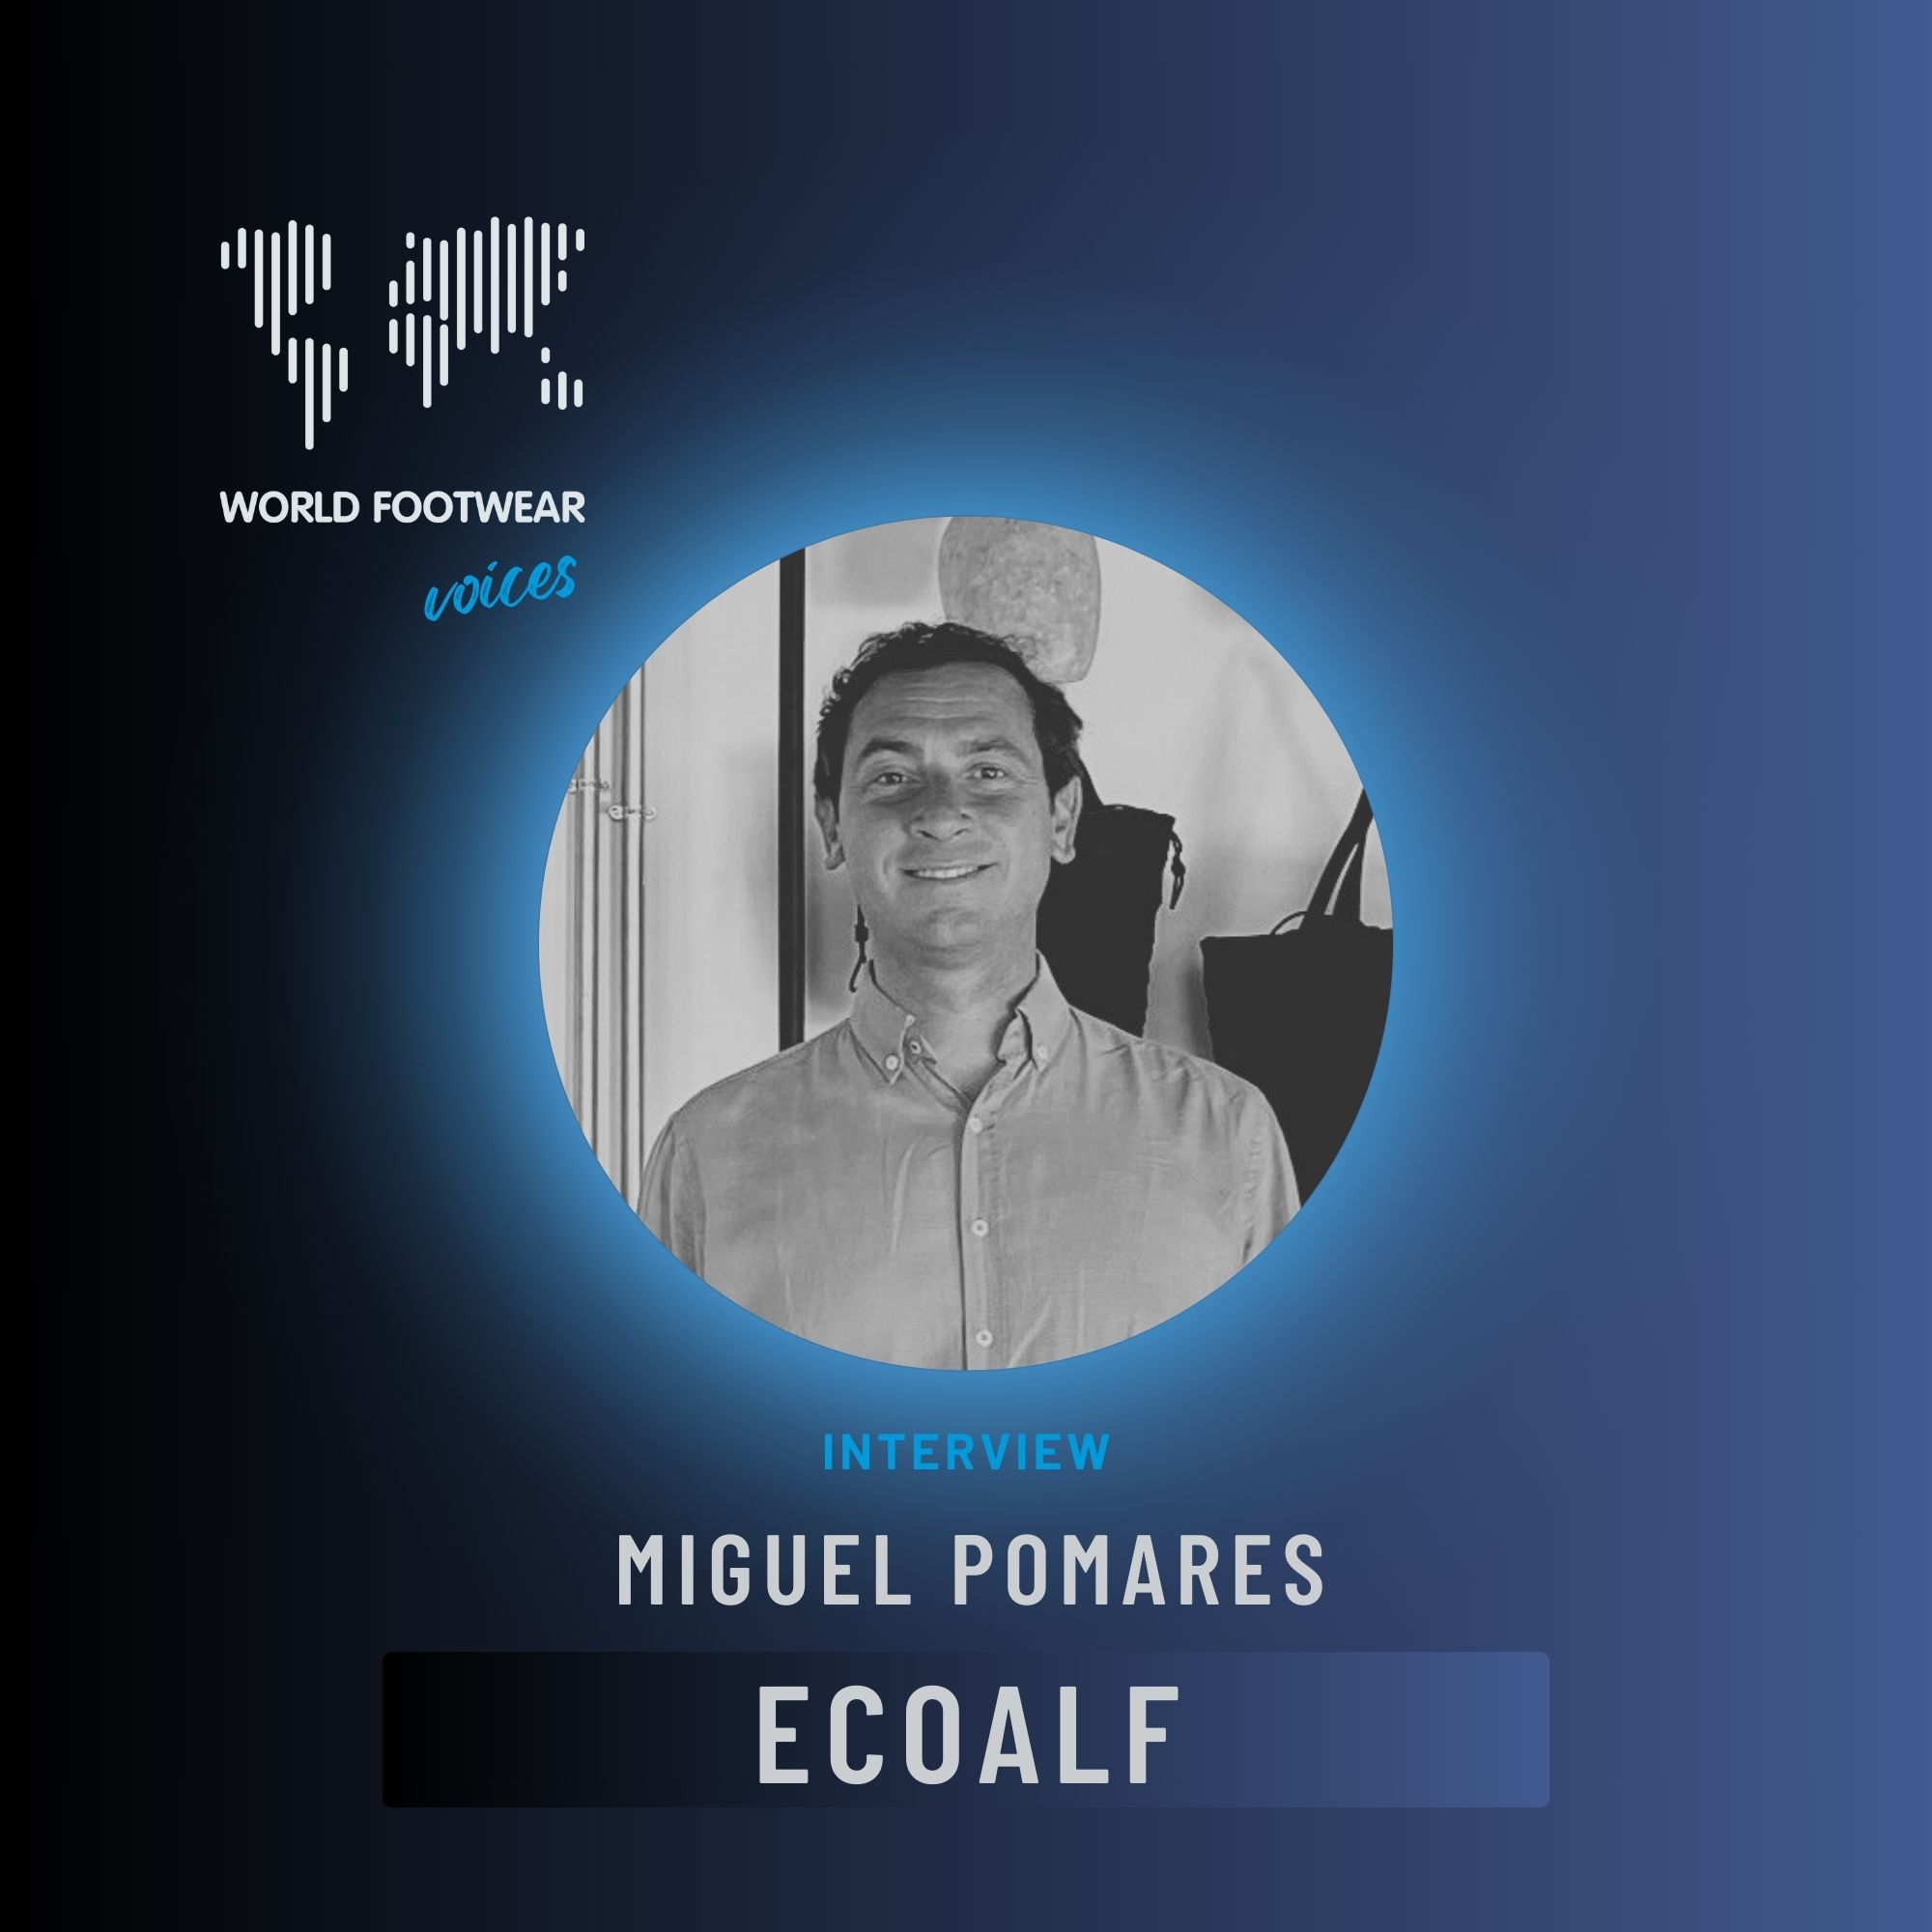 Interview with Miguel Pomares from Ecoalf